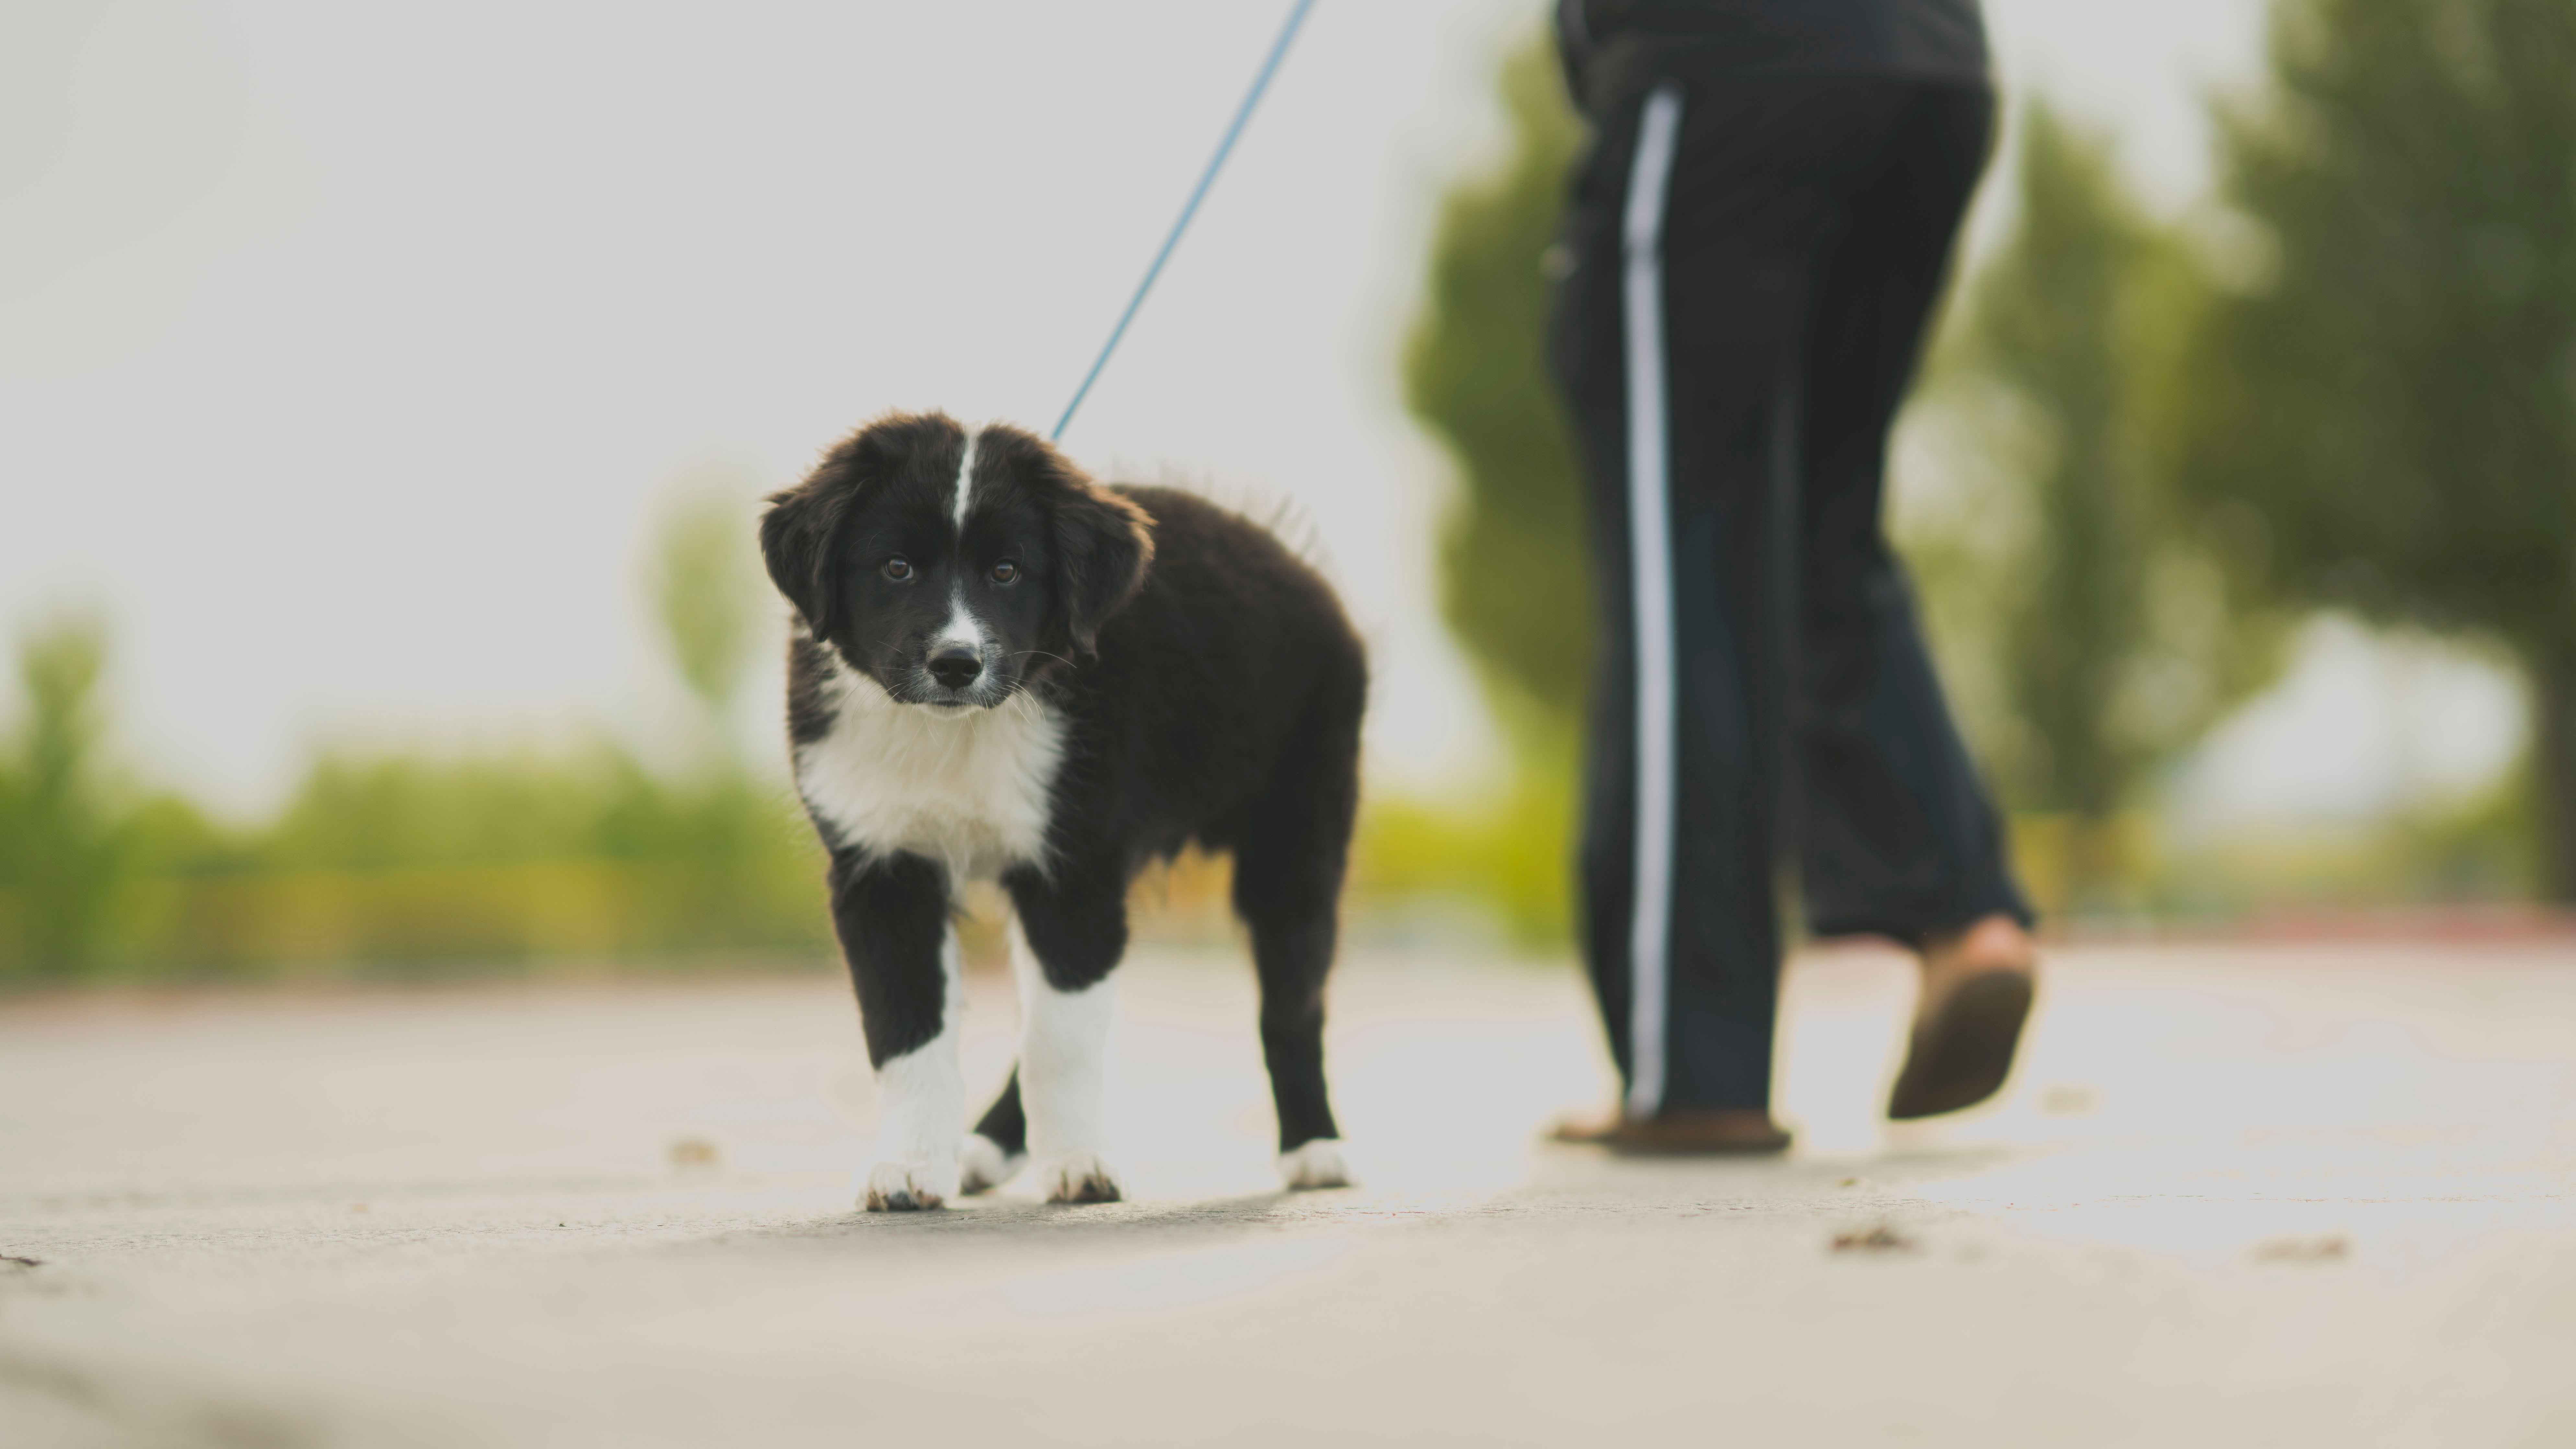 Border Collie Puppy Training 101: A Step-by-Step Guide to Teach Basic Commands